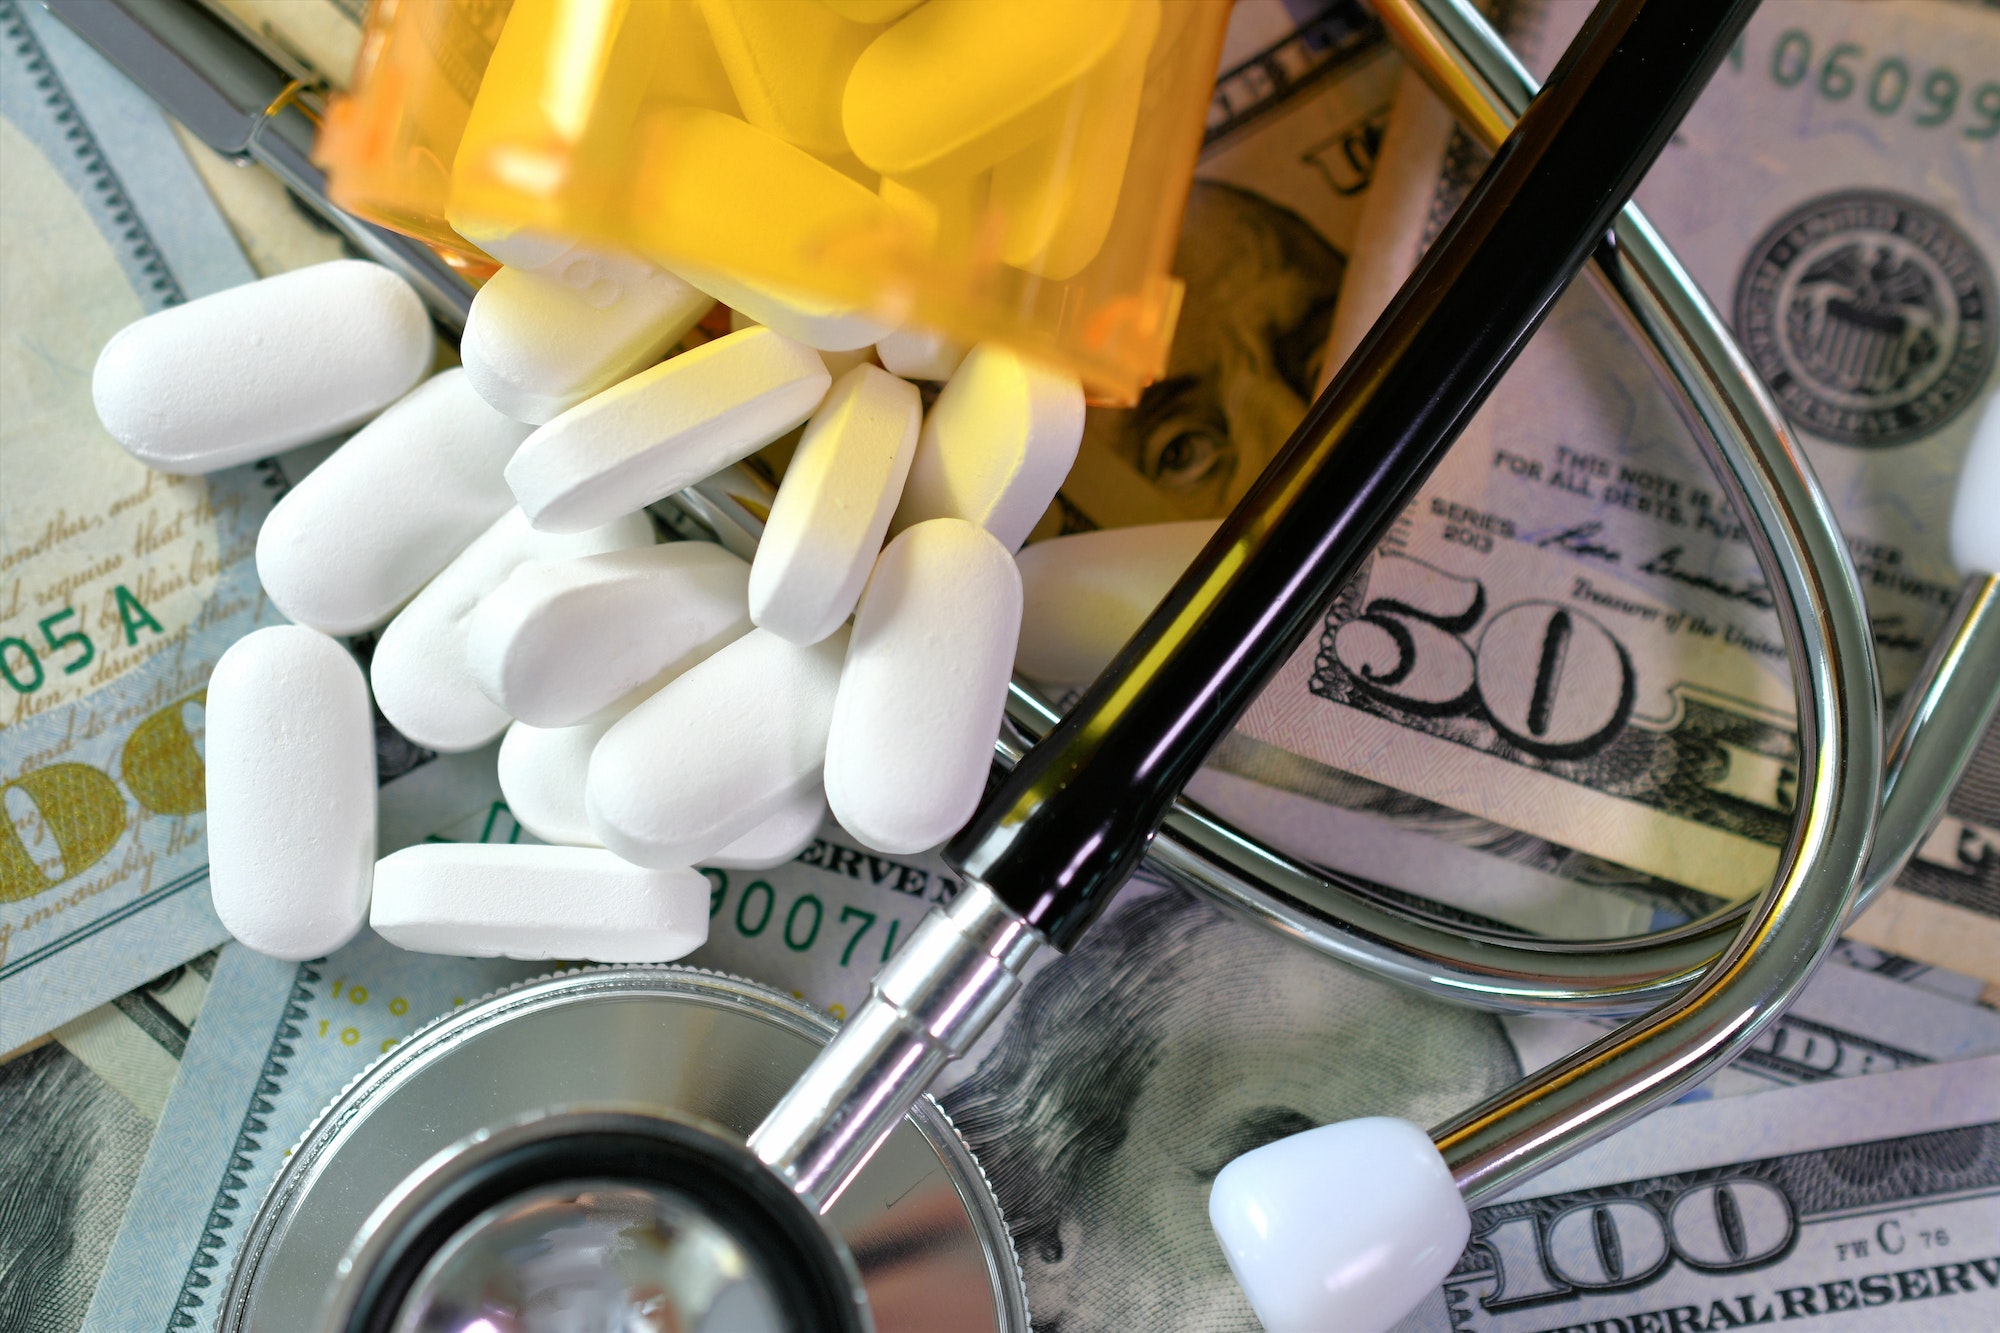 A stethoscope laying on medicine white pills and money with an RX prescription drug bottles